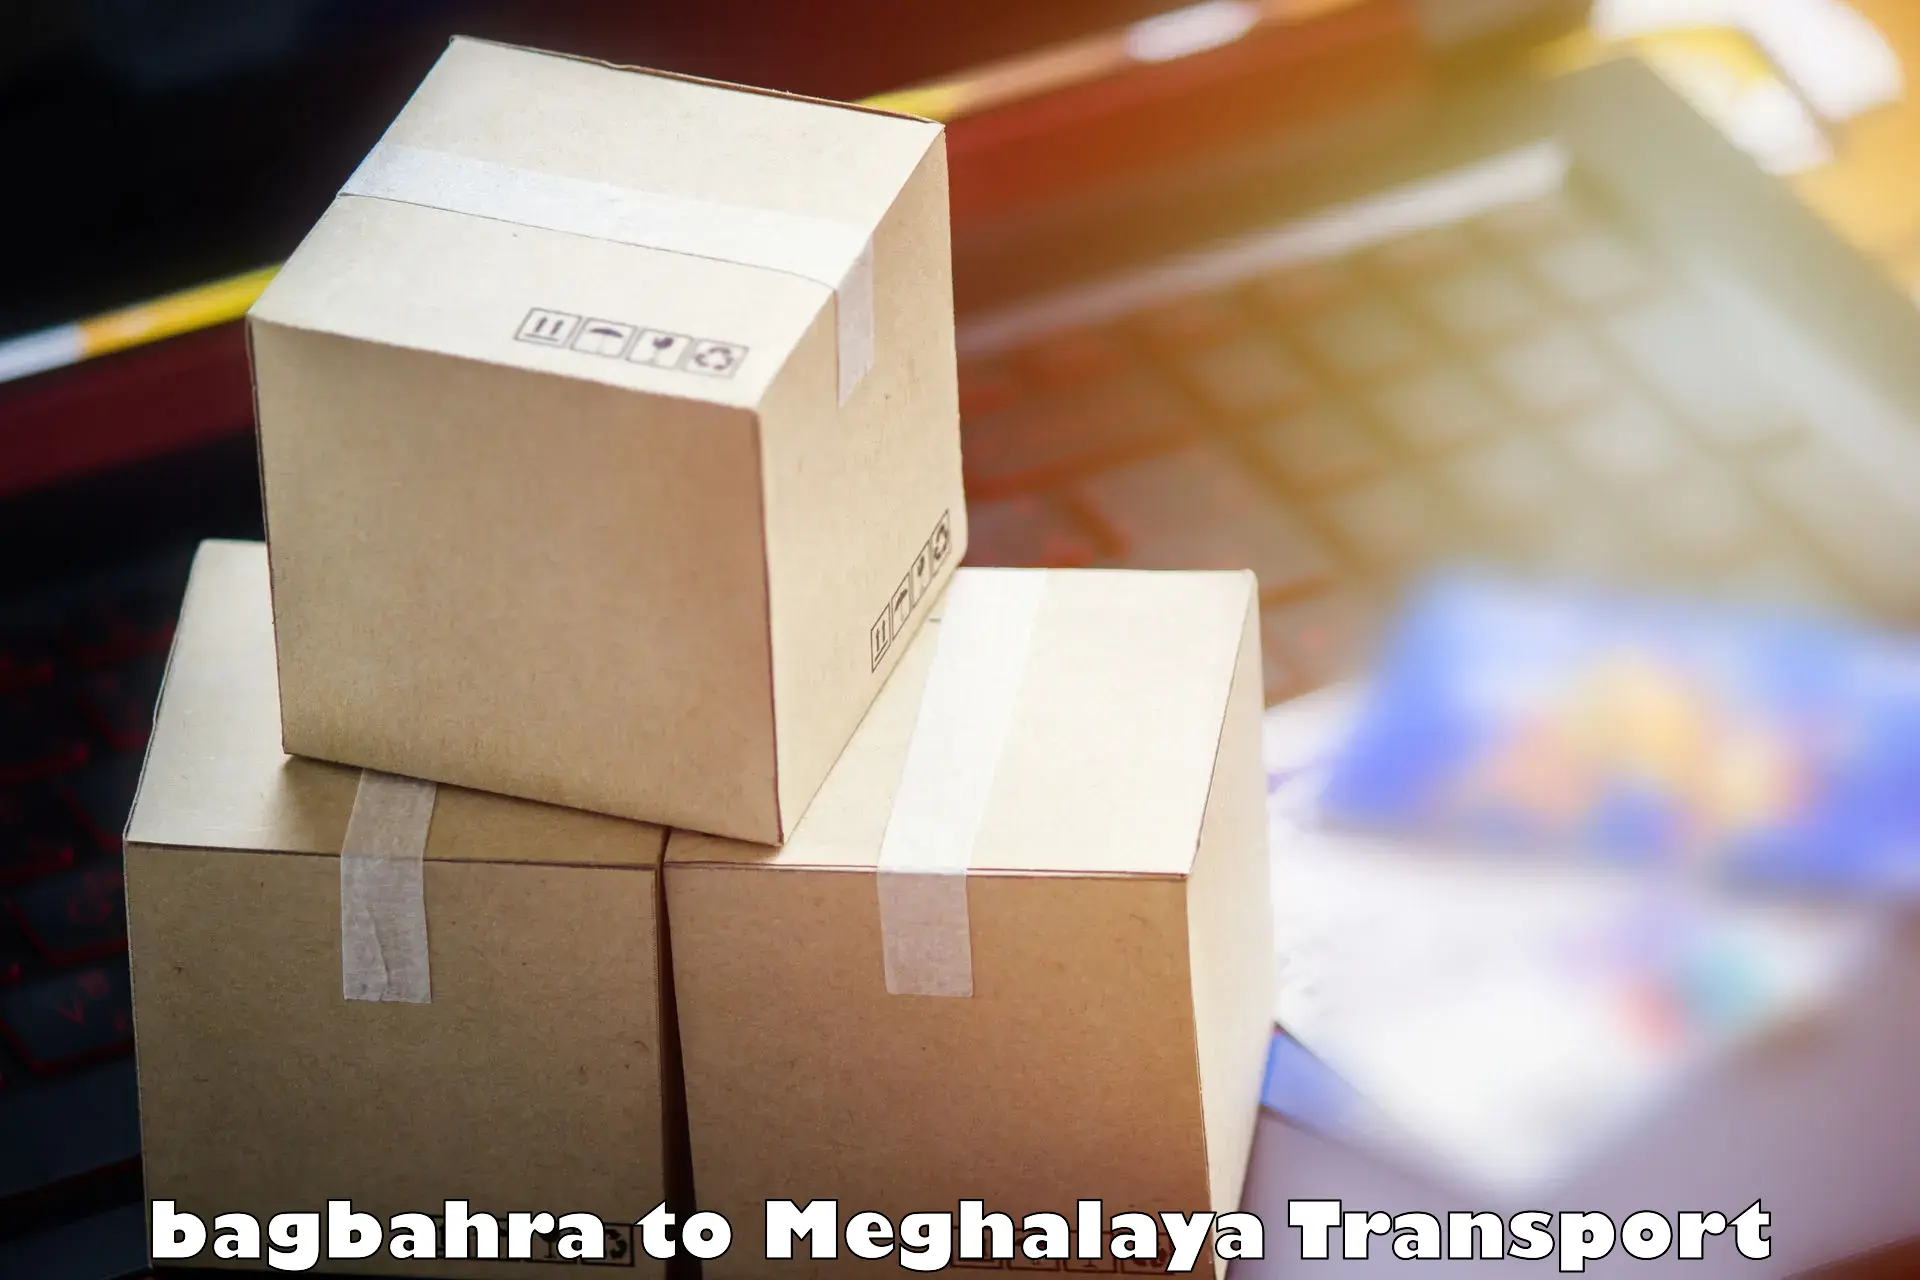 Nationwide transport services in bagbahra to Umsaw